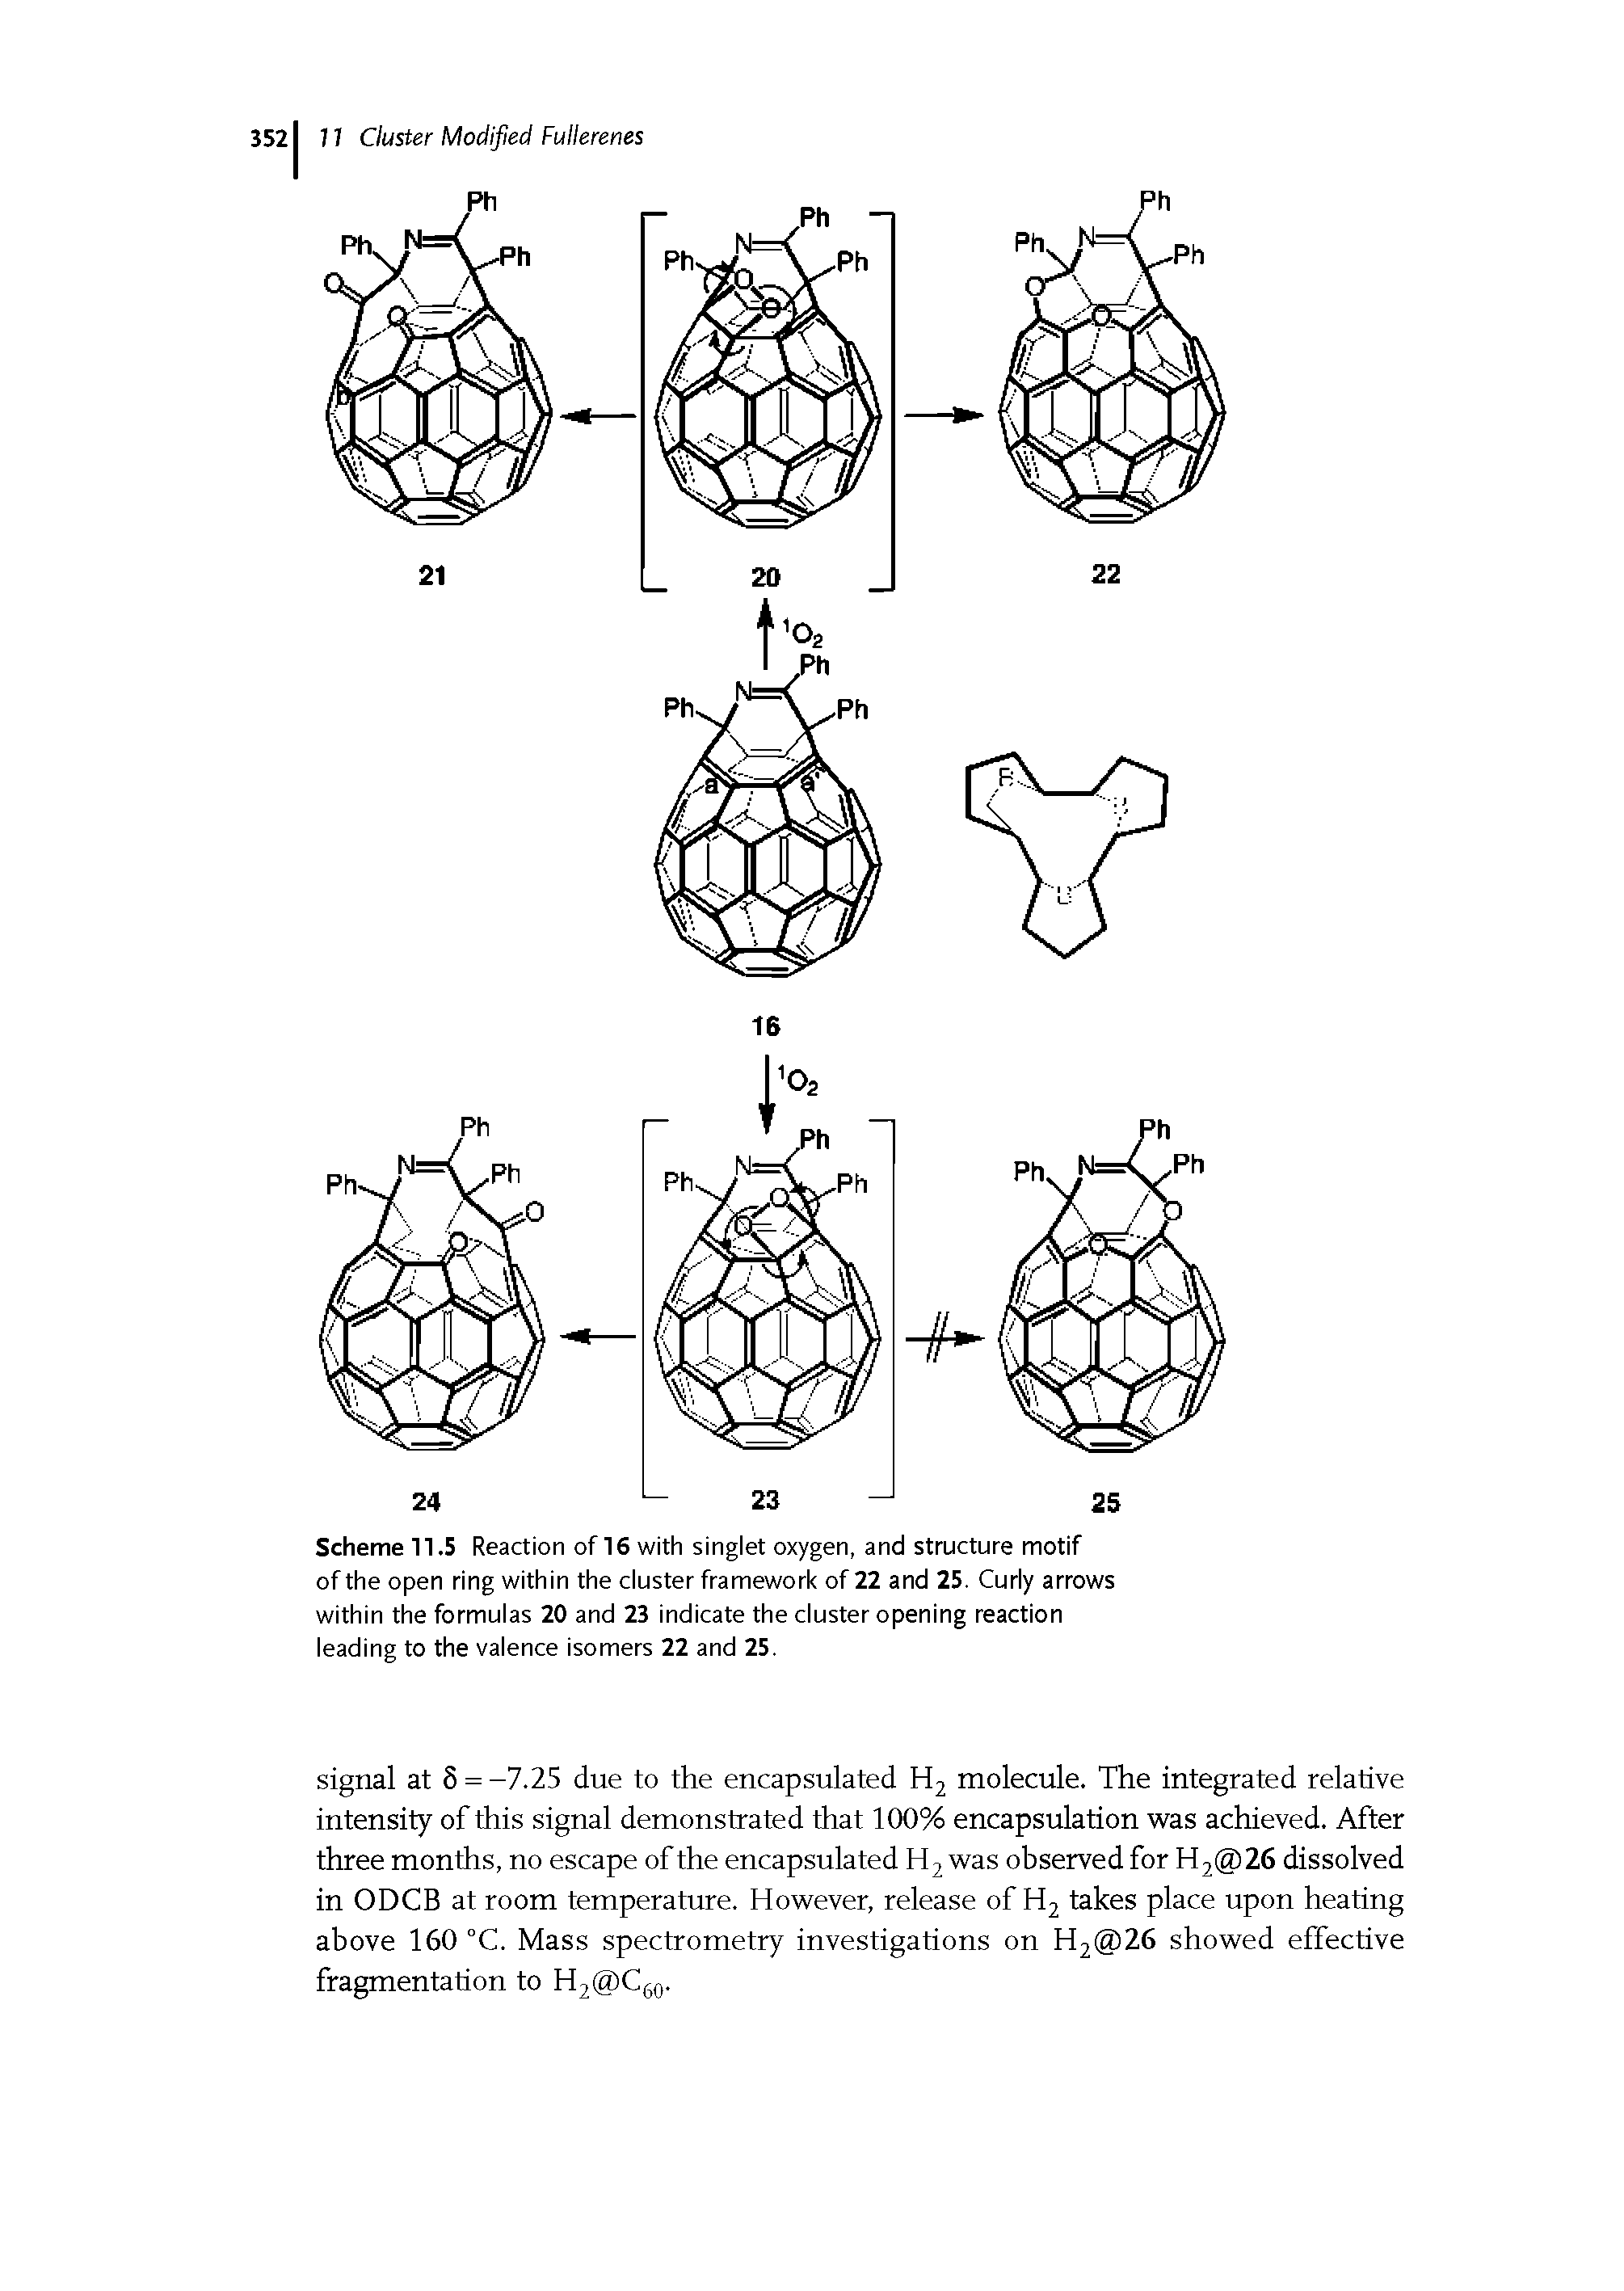 Scheme 11.5 Reaction of 16 with singlet oxygen, and structure motif of the open ring within the cluster framework of 22 and 25. Curly arrows within the formulas 20 and 23 indicate the cluster opening reaction leading to the valence isomers 22 and 25.